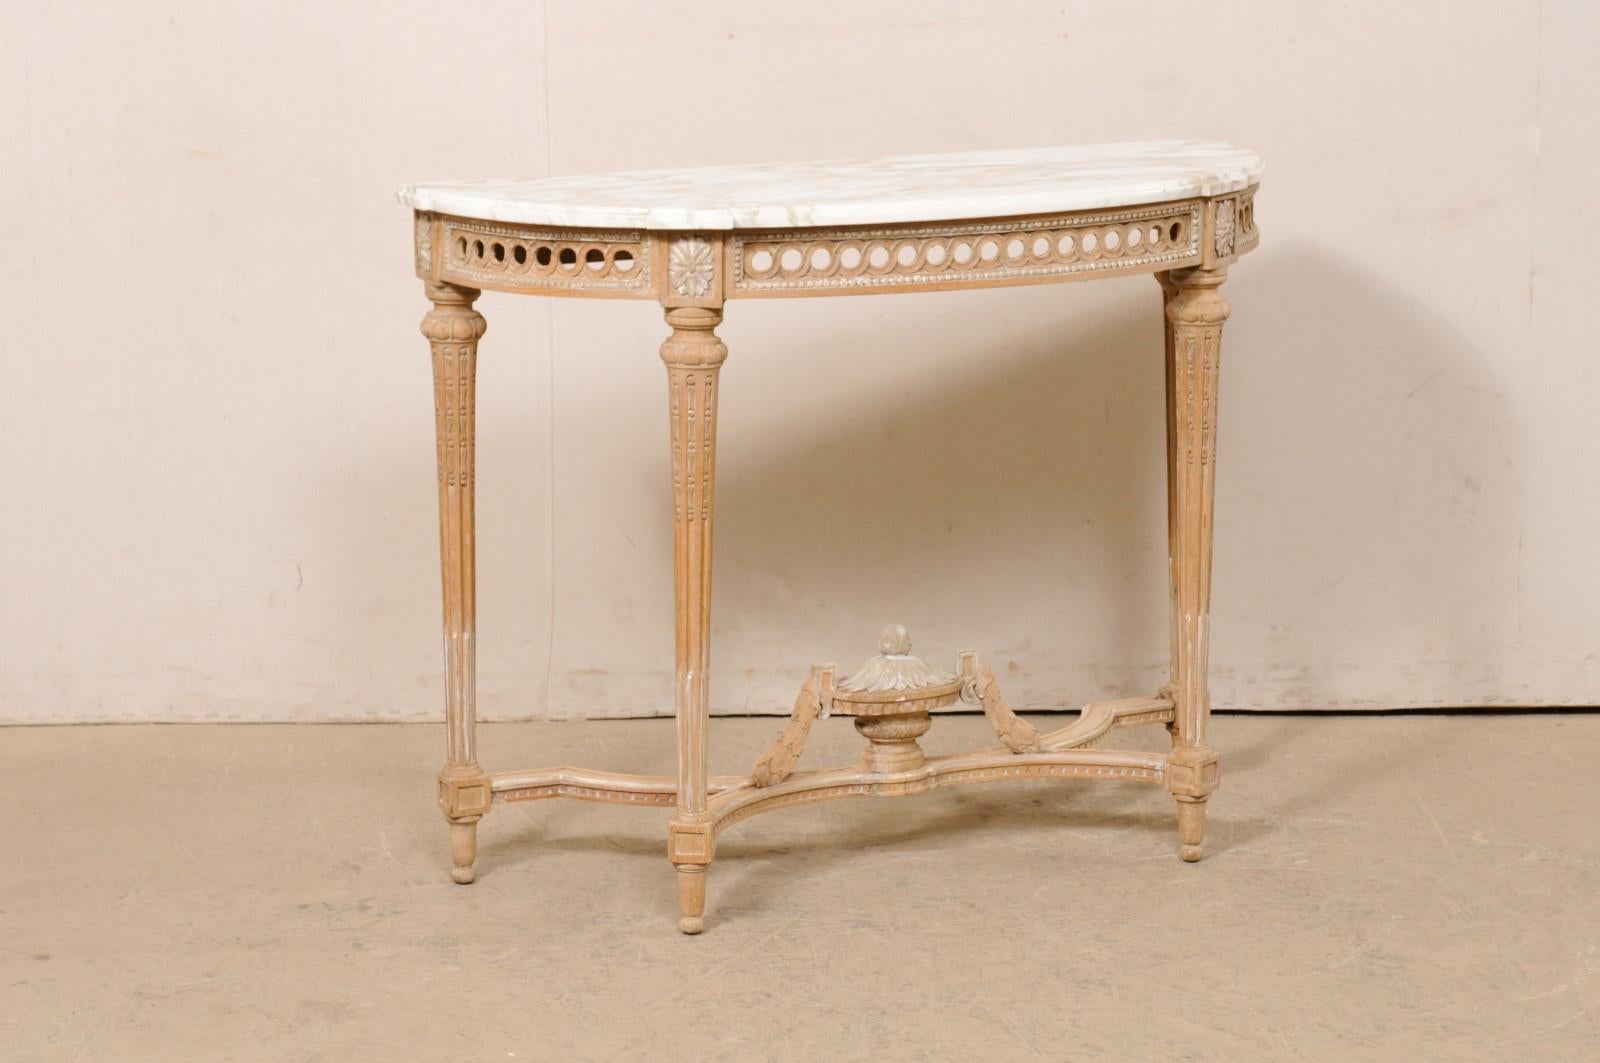 A French Neoclassic style marble-top console, with carved urn finial accent at underside, from the mid 20th century. This vintage table from France features an oblong-demi shaped white marble top, with shallow stepped out accents above each leg. The